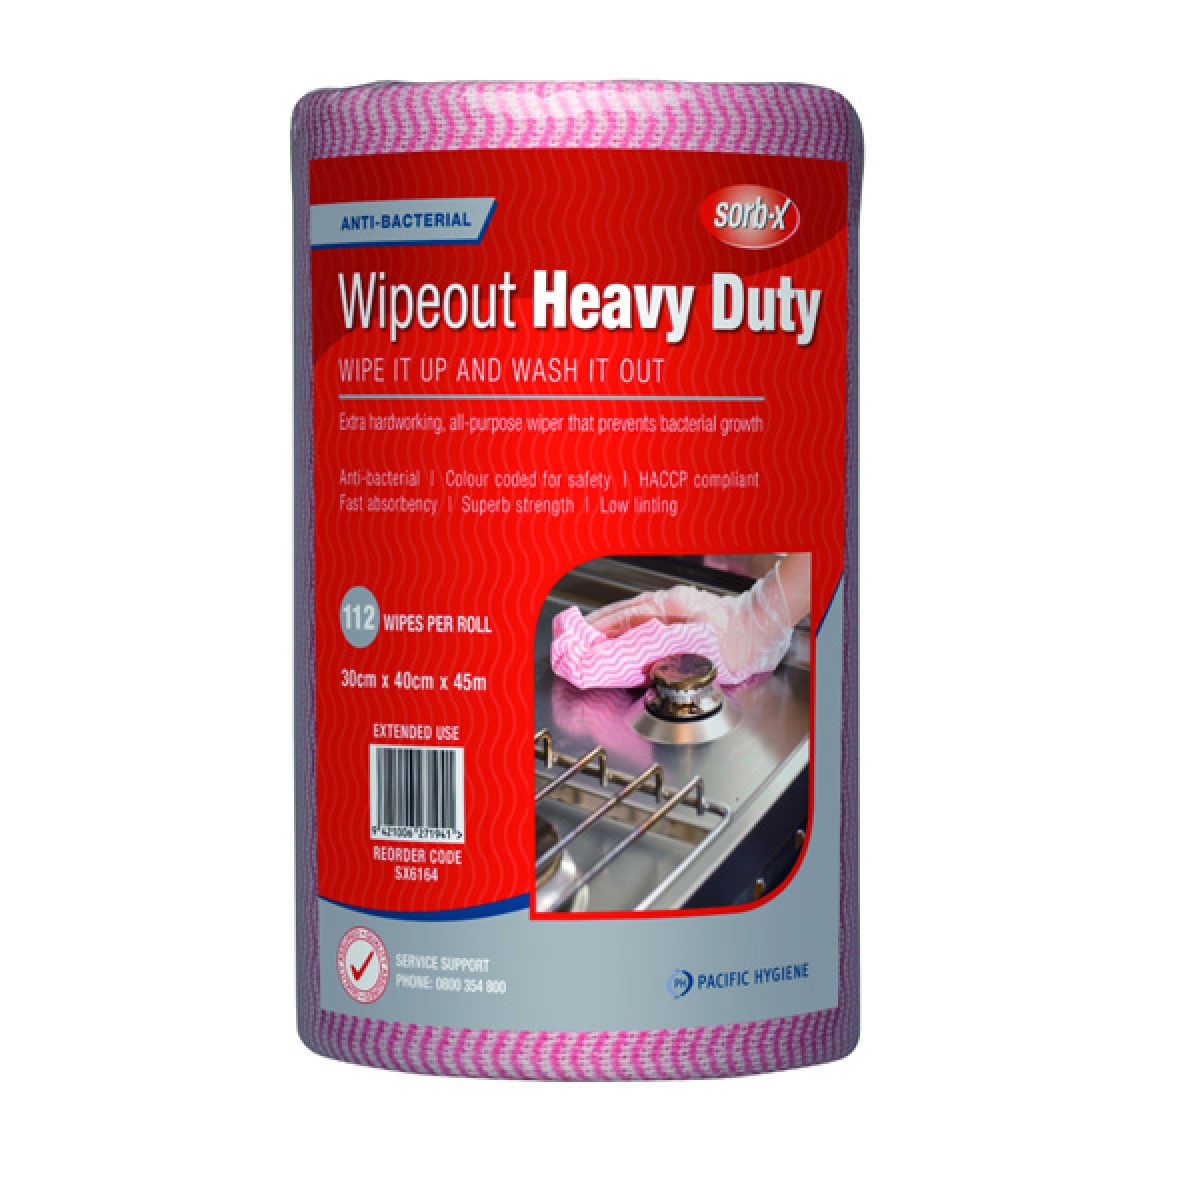 PH Wipeout Heavy Duty Anti-Bacterial Wipes Red 112 Roll